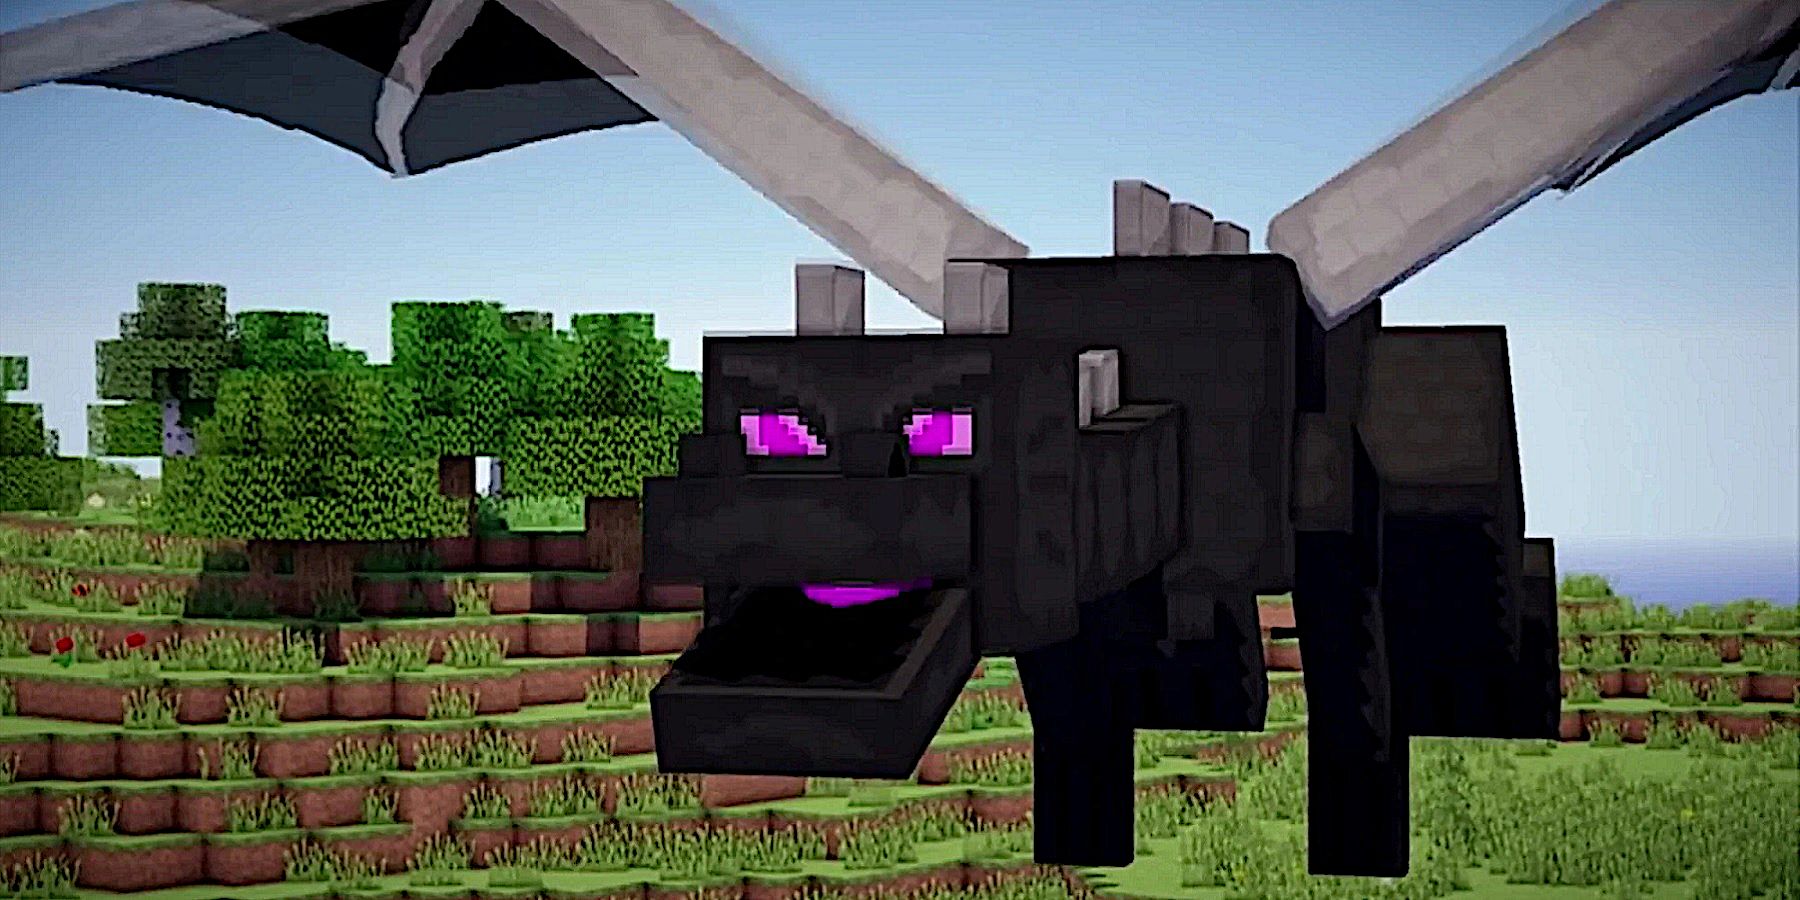 Image from Minecraft showing a close-up of the Ender Dragon flying in the overworld.